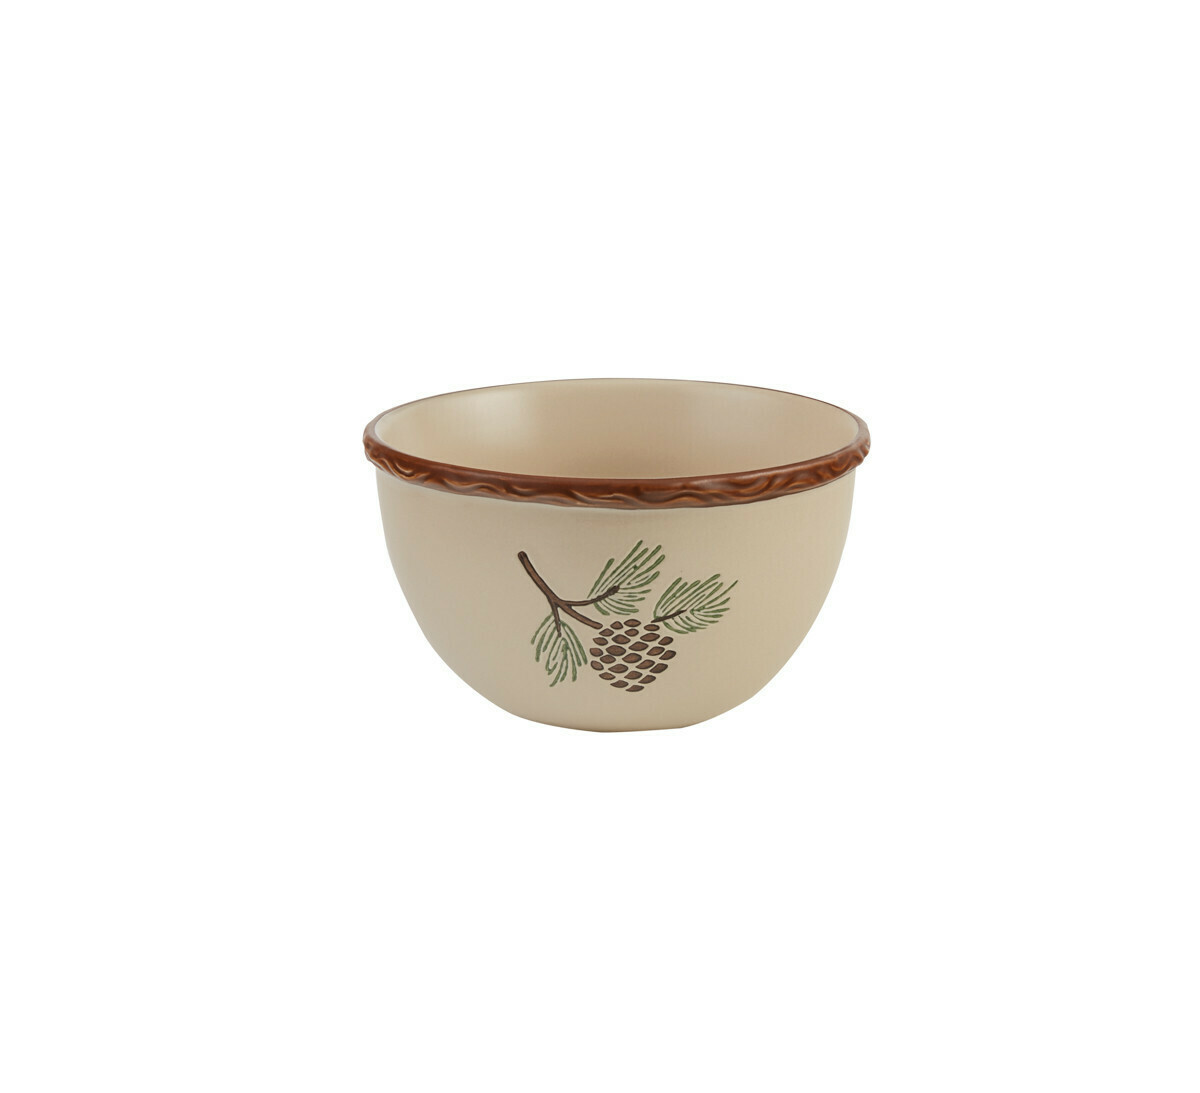 Pinecroft Cereal Bowl